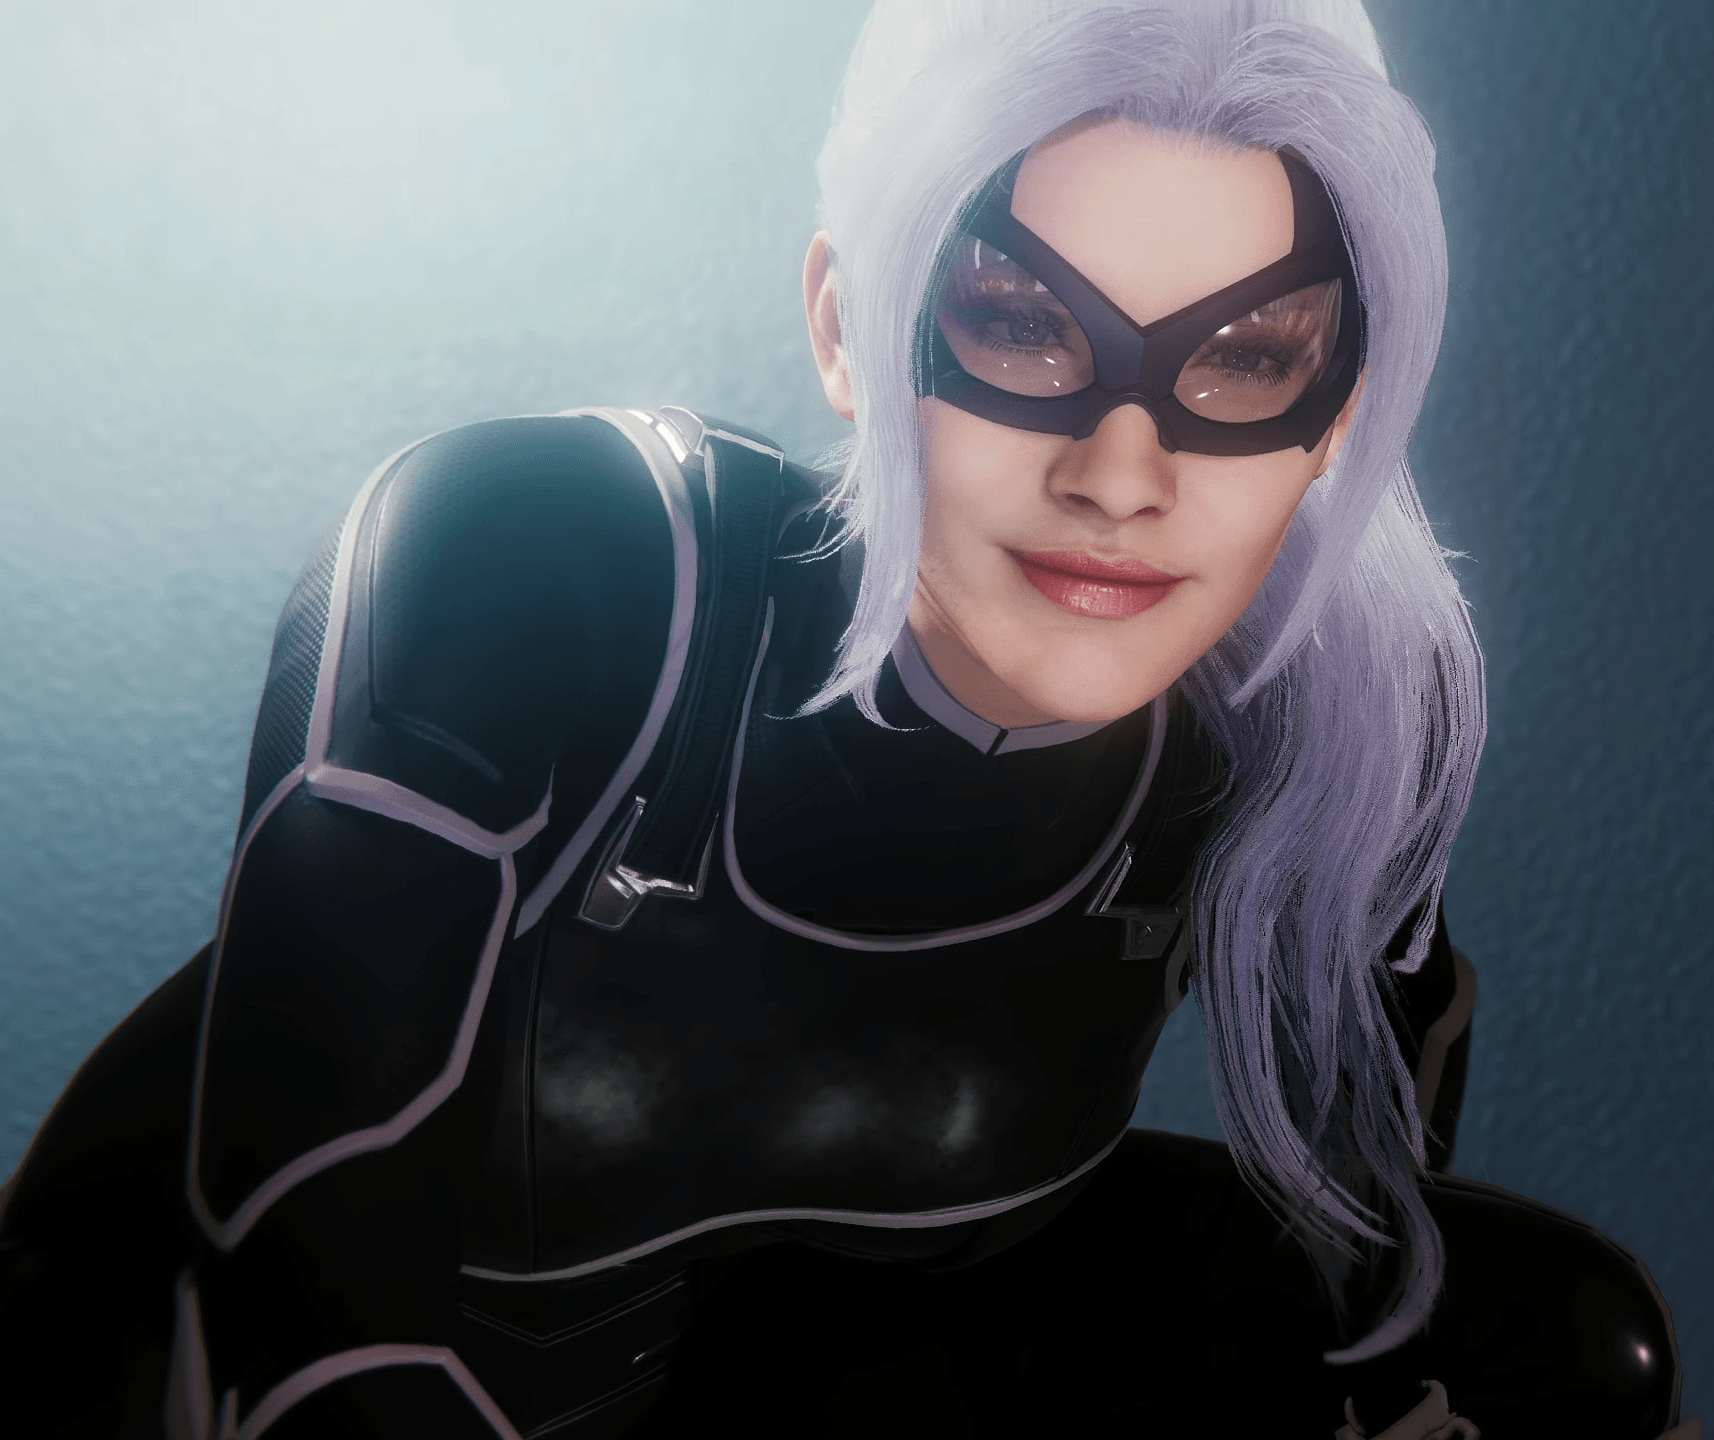 HQ Black Cat. Details In Her Mask Face Are Crazy